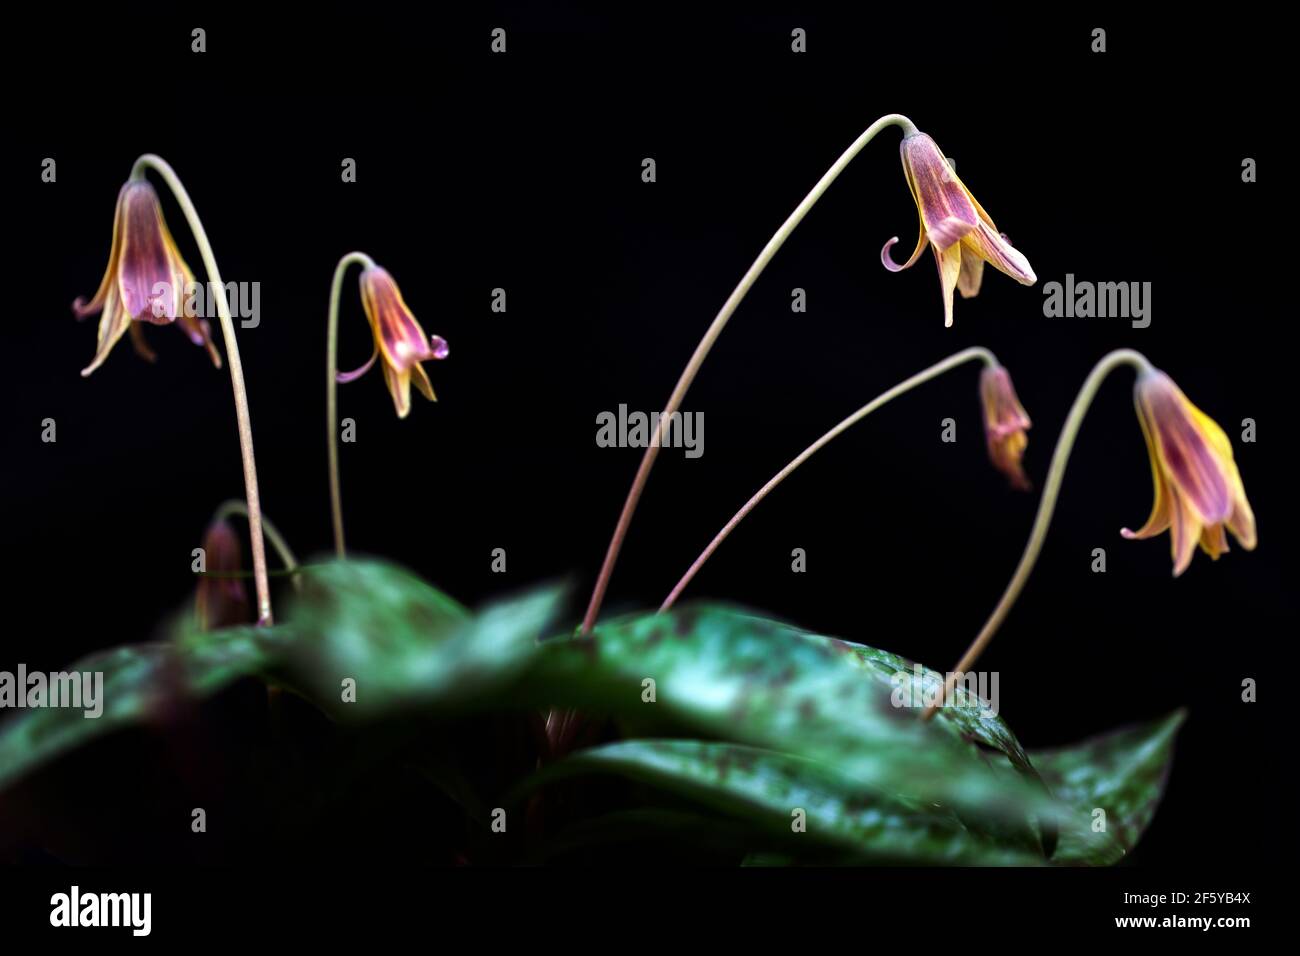 Cluster of Trout Lilies (Dog-Tooth Violets) (Erythronium umbilicatum) against black background - Holmes Educational State Forest, Hendersonville, Nort Stock Photo